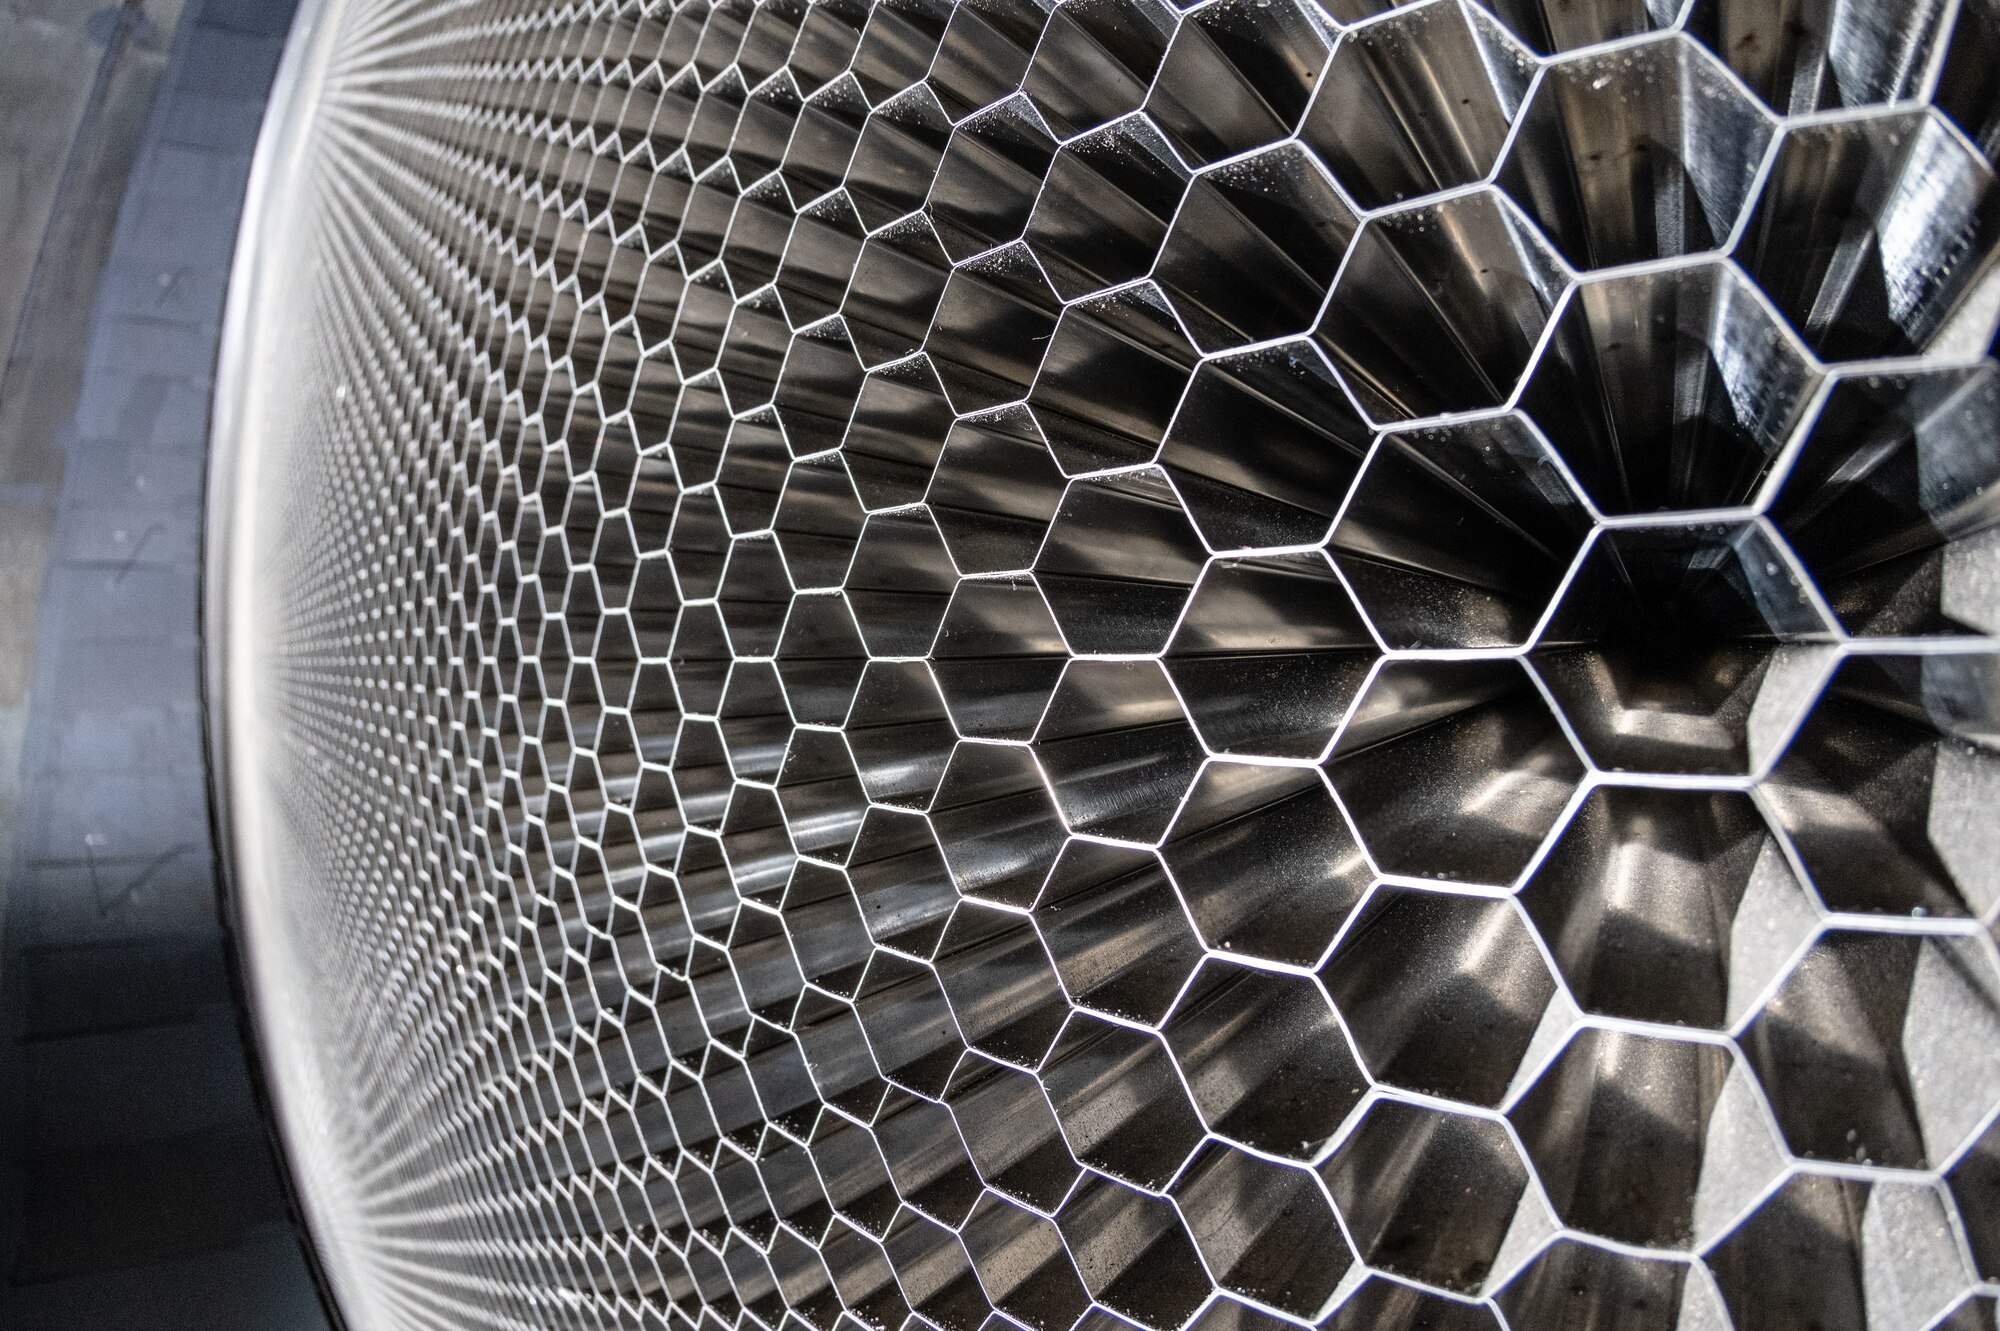 A closeup of the “honeycomb” structure in the 16-foot supersonic wind tunnel at Arnold Air Force Base, Tenn., is shown. The purpose of the honeycomb is to enhance wind tunnel flow quality. The installation process was completed in October 2023. The honeycomb is a single-piece structure that measures 55 feet in diameter, 4 feet thick and weighs more than 67 tons. It is made up of thousands of stainless steel 1-inch hexagonal honeycomb tubes. (U.S. Air Force photo by Keith Thornburgh)